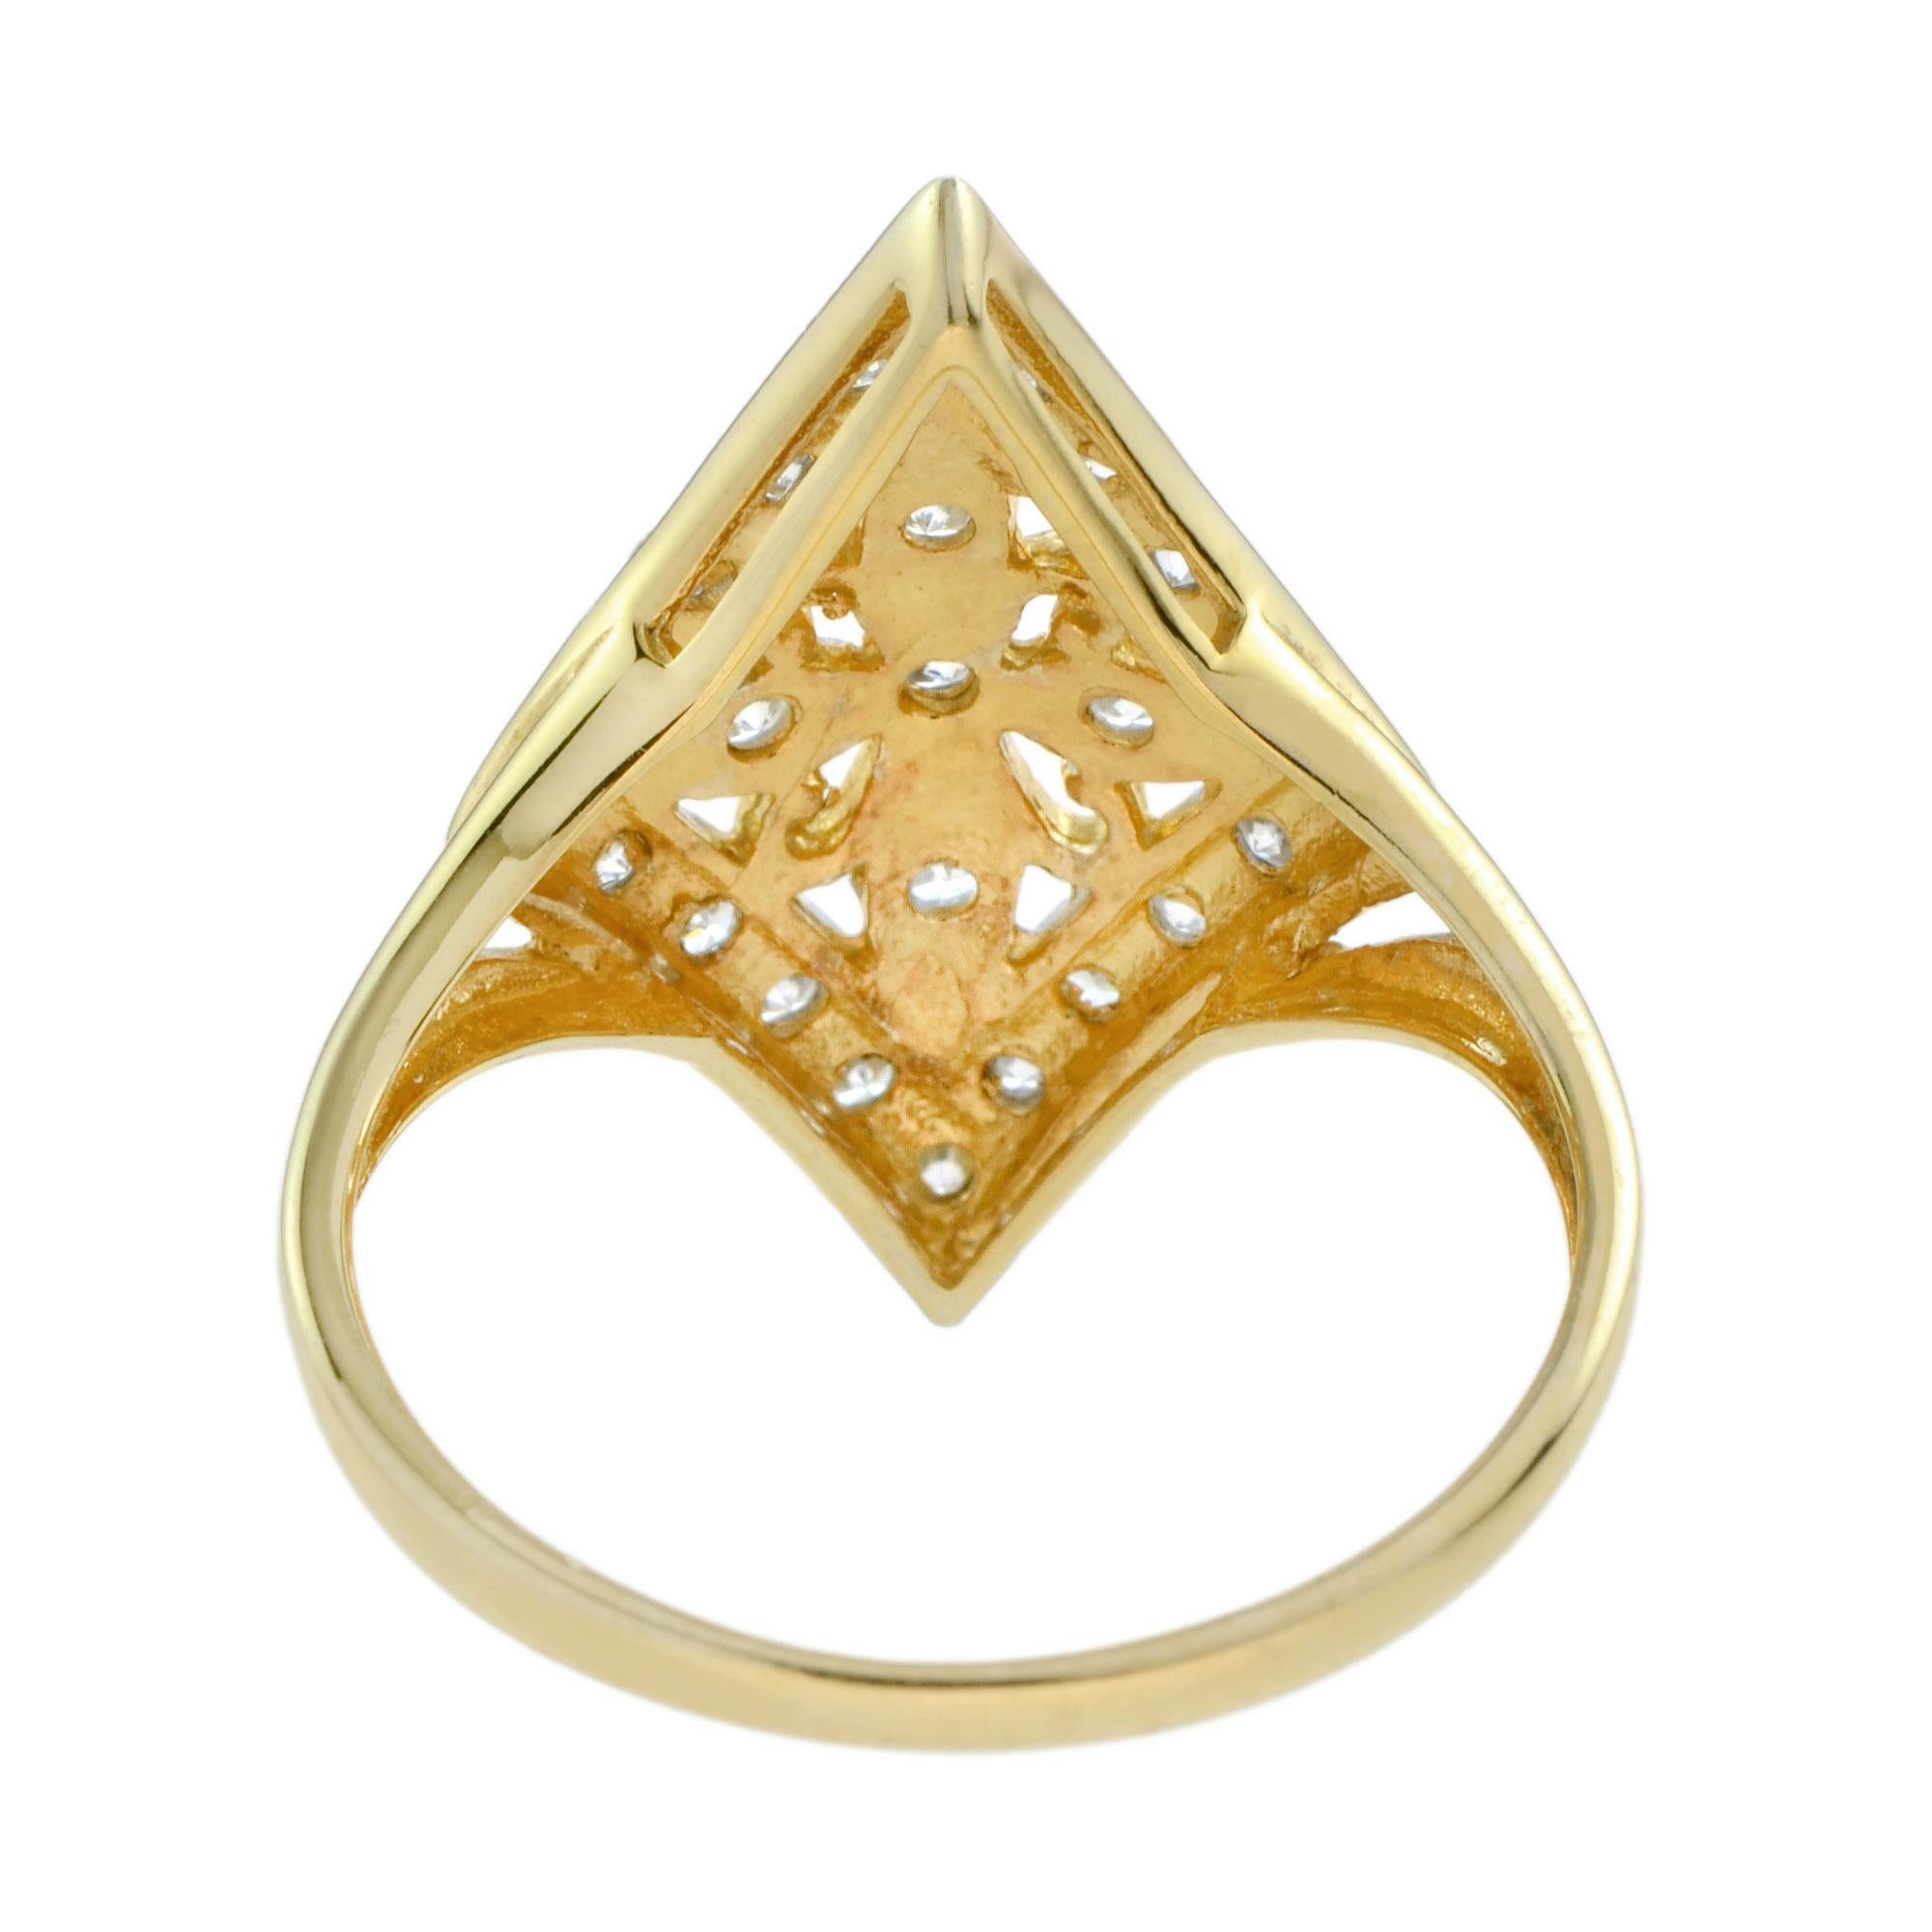 For Sale:  Vintage Style Diamond Floral Filigree Ring in 14K Yellow Gold 4